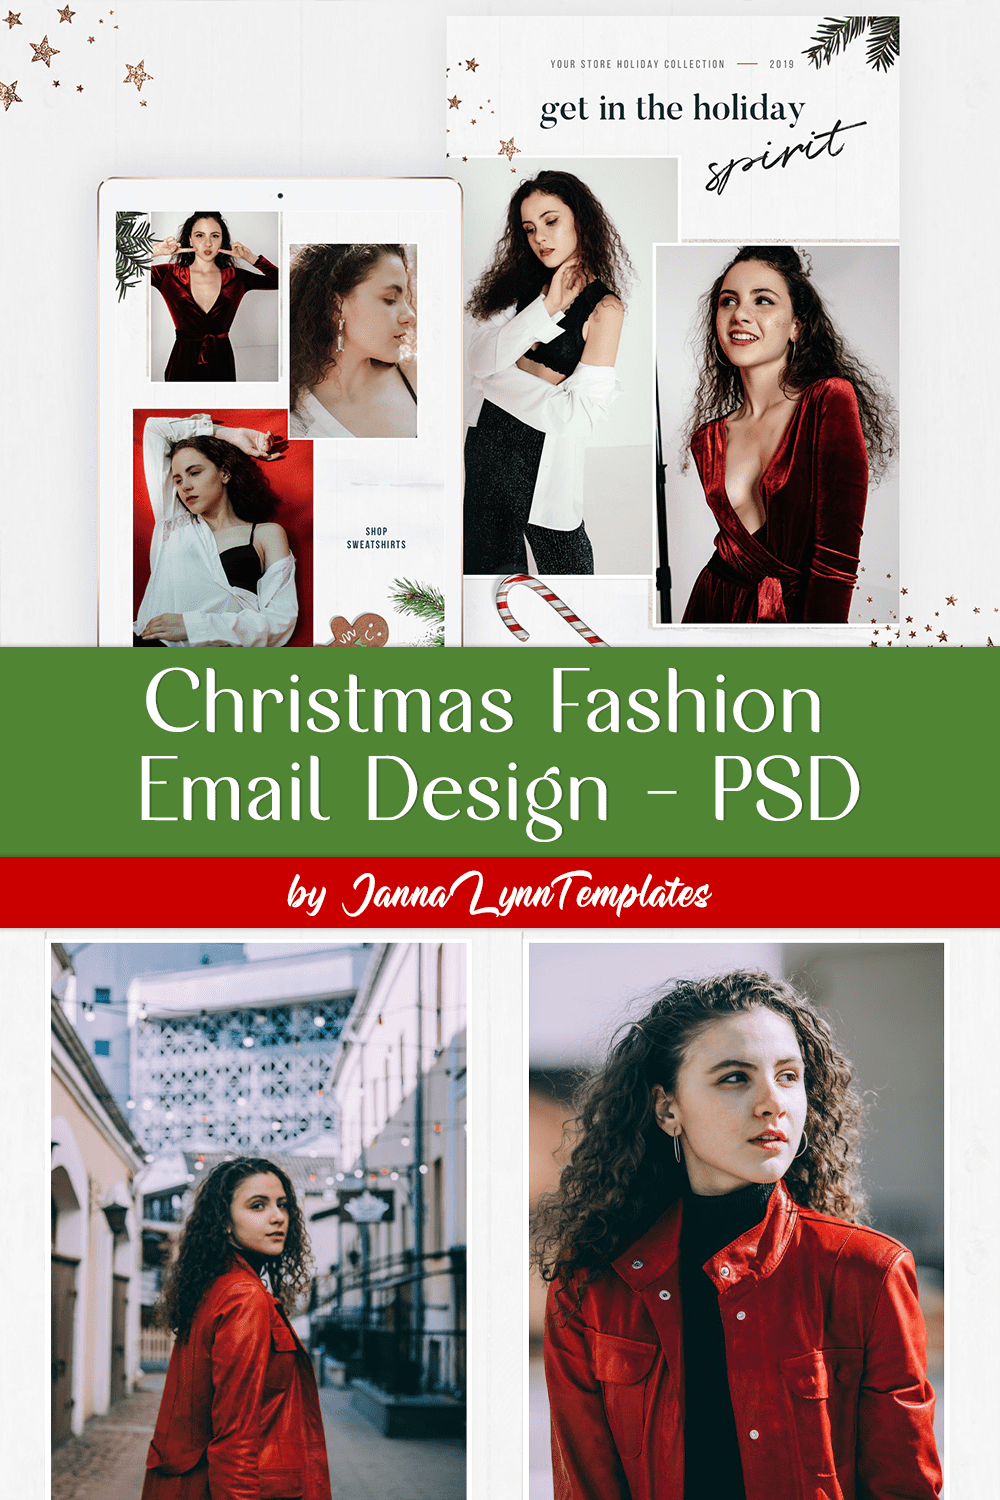 Pack of images of a unique email design template with a Christmas fashion theme.